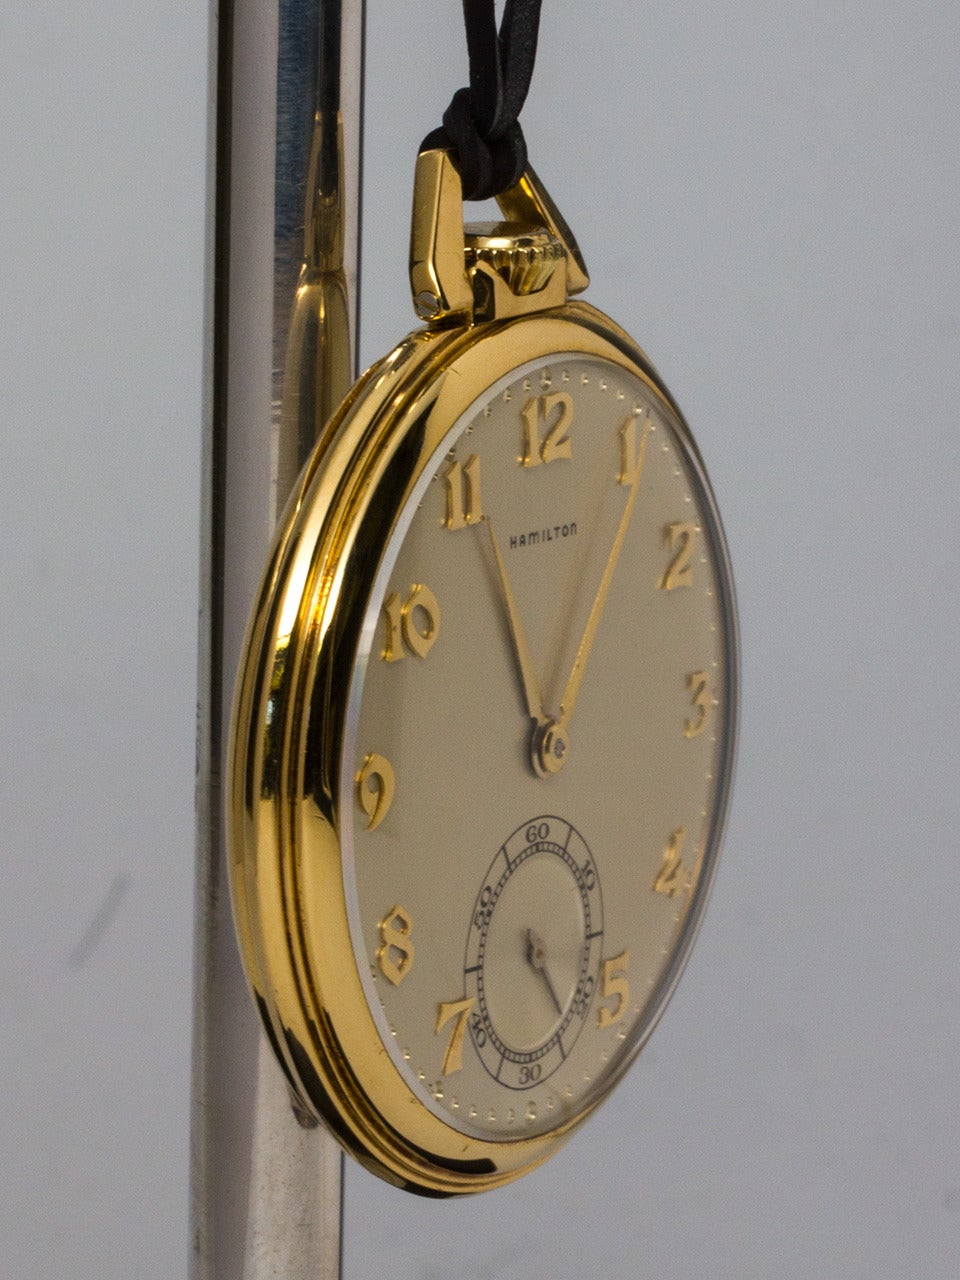 Hamilton 18K yellow gold open face dress pocket watch, circa 1940s. 12-size pocket watch with open face, featuring beautiful condition original two-tone silvered satin dial with applied yellow gold stylized Arabic numerals and gold hands. Powered by